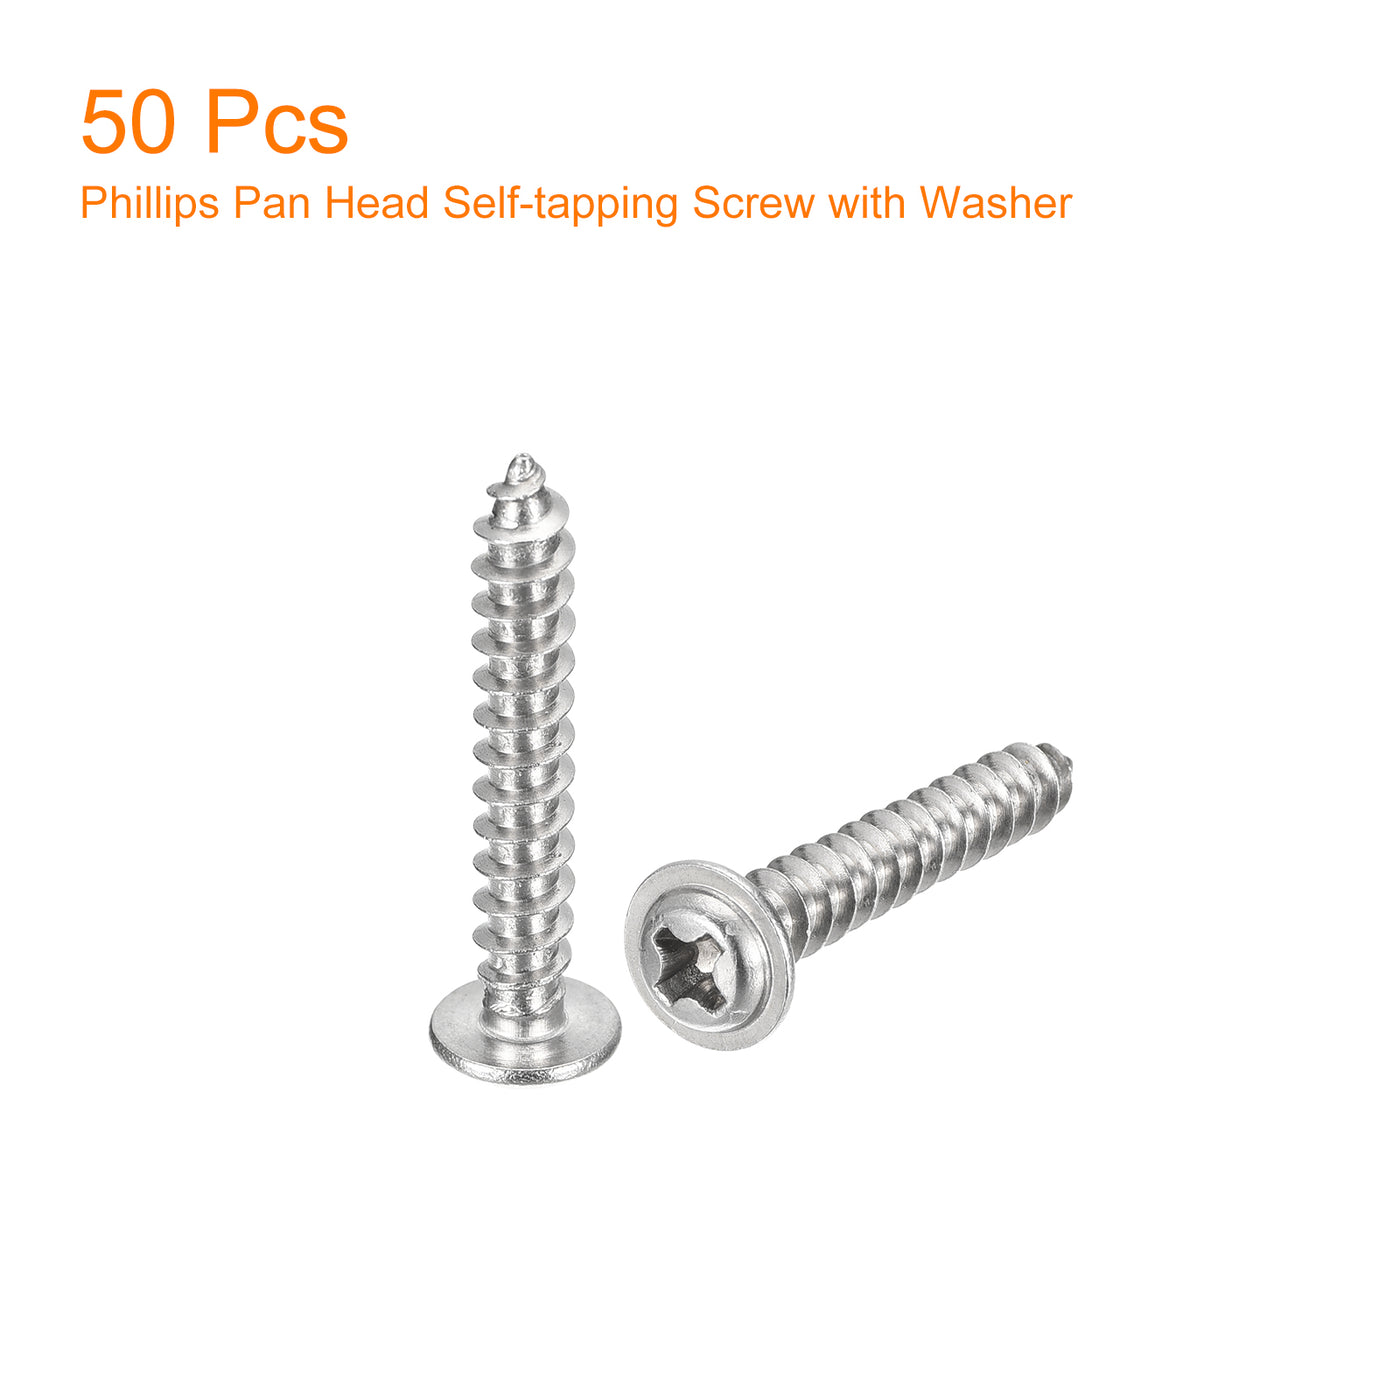 uxcell Uxcell ST4x25mm Phillips Pan Head Self-tapping Screw with Washer, 50pcs - 304 Stainless Steel Wood Screw Full Thread (Silver)